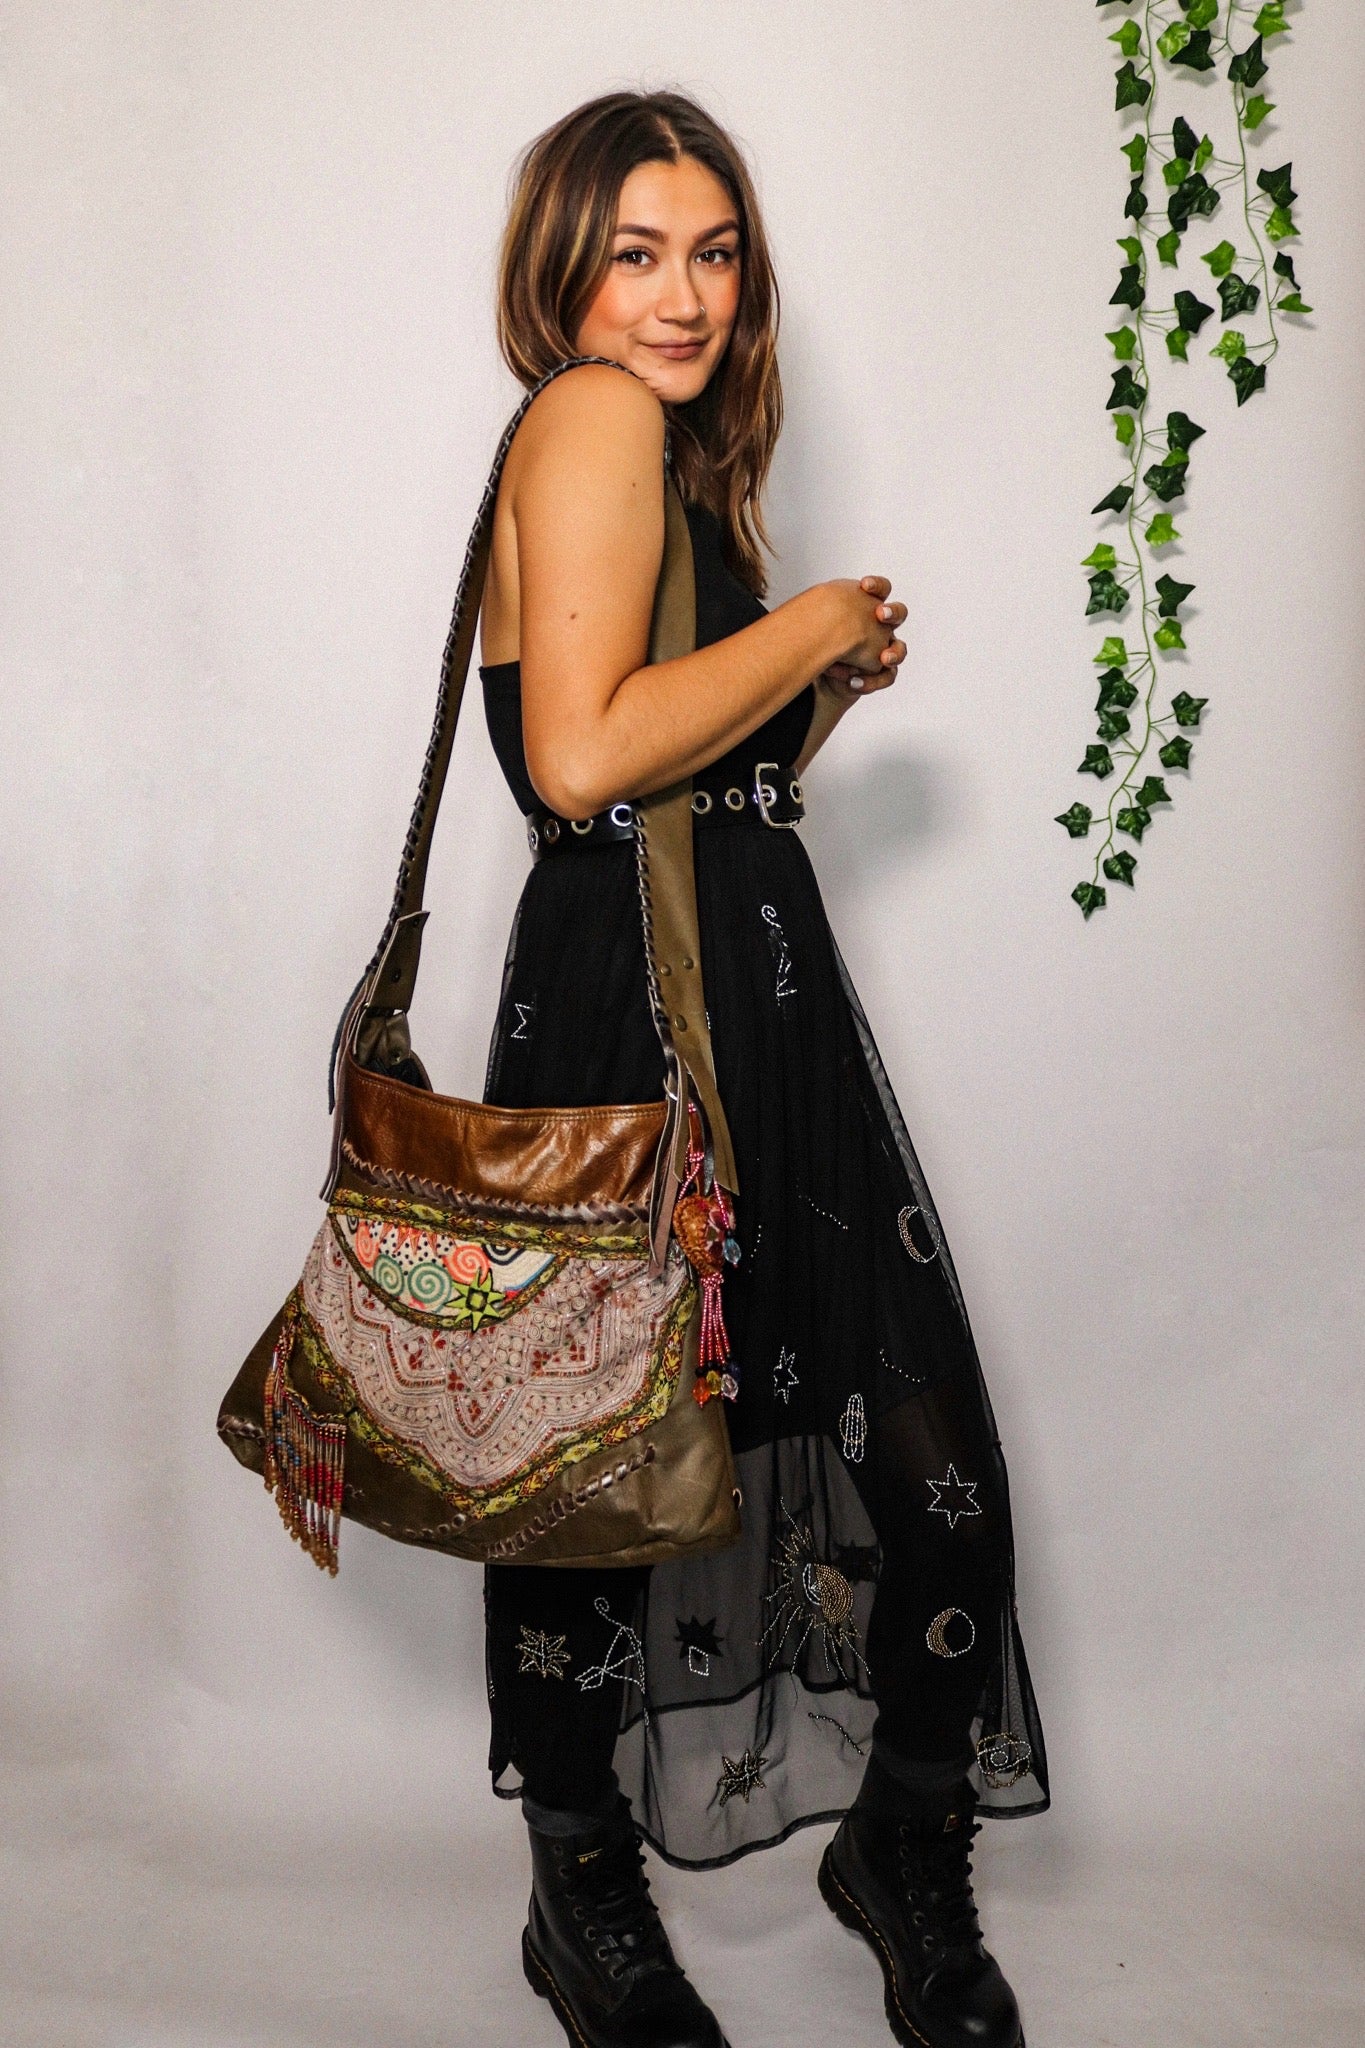 Boho Bag Collection – Capturing Couture